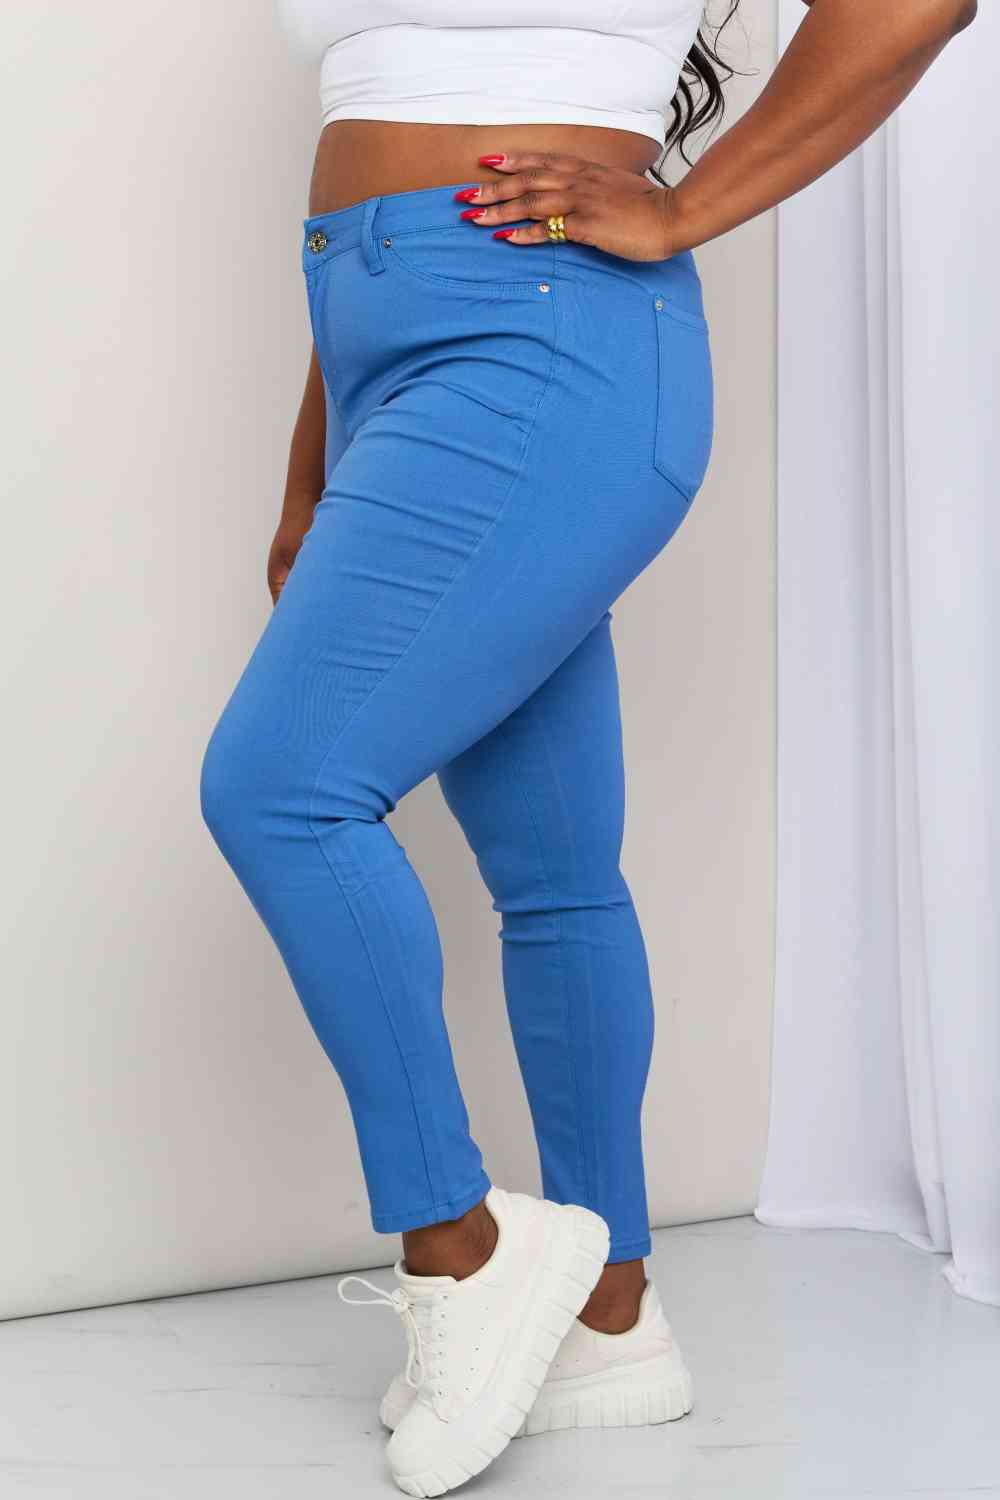 YMI Jeanswear Kate Hyper-Stretch Full Size Mid-Rise Skinny Jeans in Electric Blue - AFFORDABLE MARKET